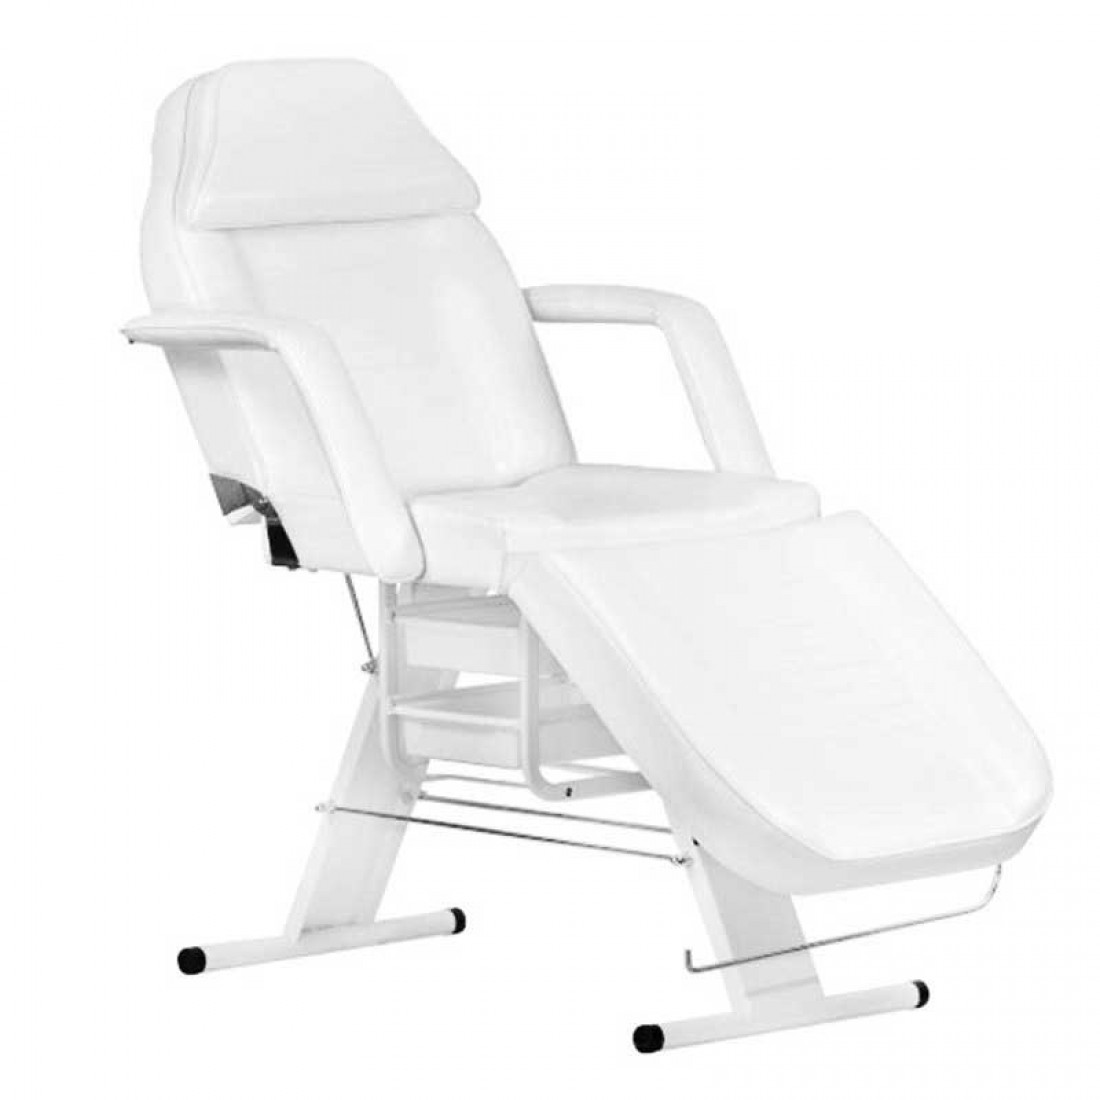 Professional tattoo & aesthetic chair - 0100712 CHAIRS WITH HYDRAULIC-MANUAL LIFT